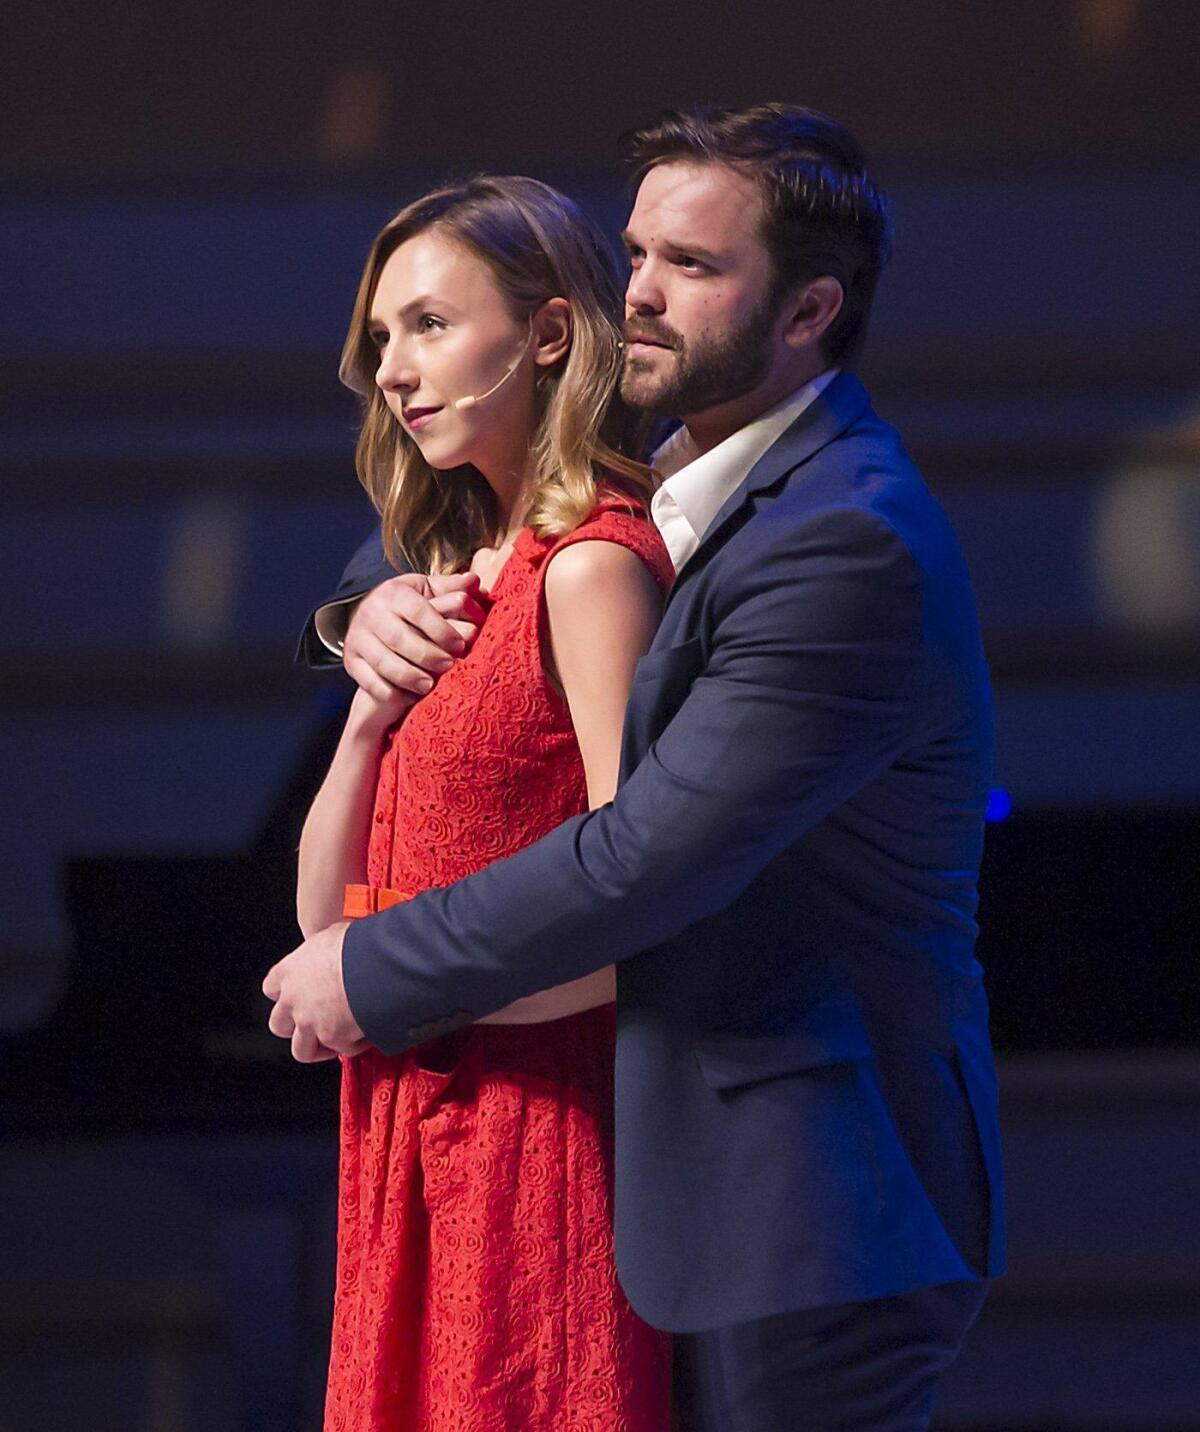 Celia Hottenstein and Cameron Bond perform “Neverland” from “Finding Neverland” during a season preview at the Renee and Henry Segerstrom Concert Hall on Monday.